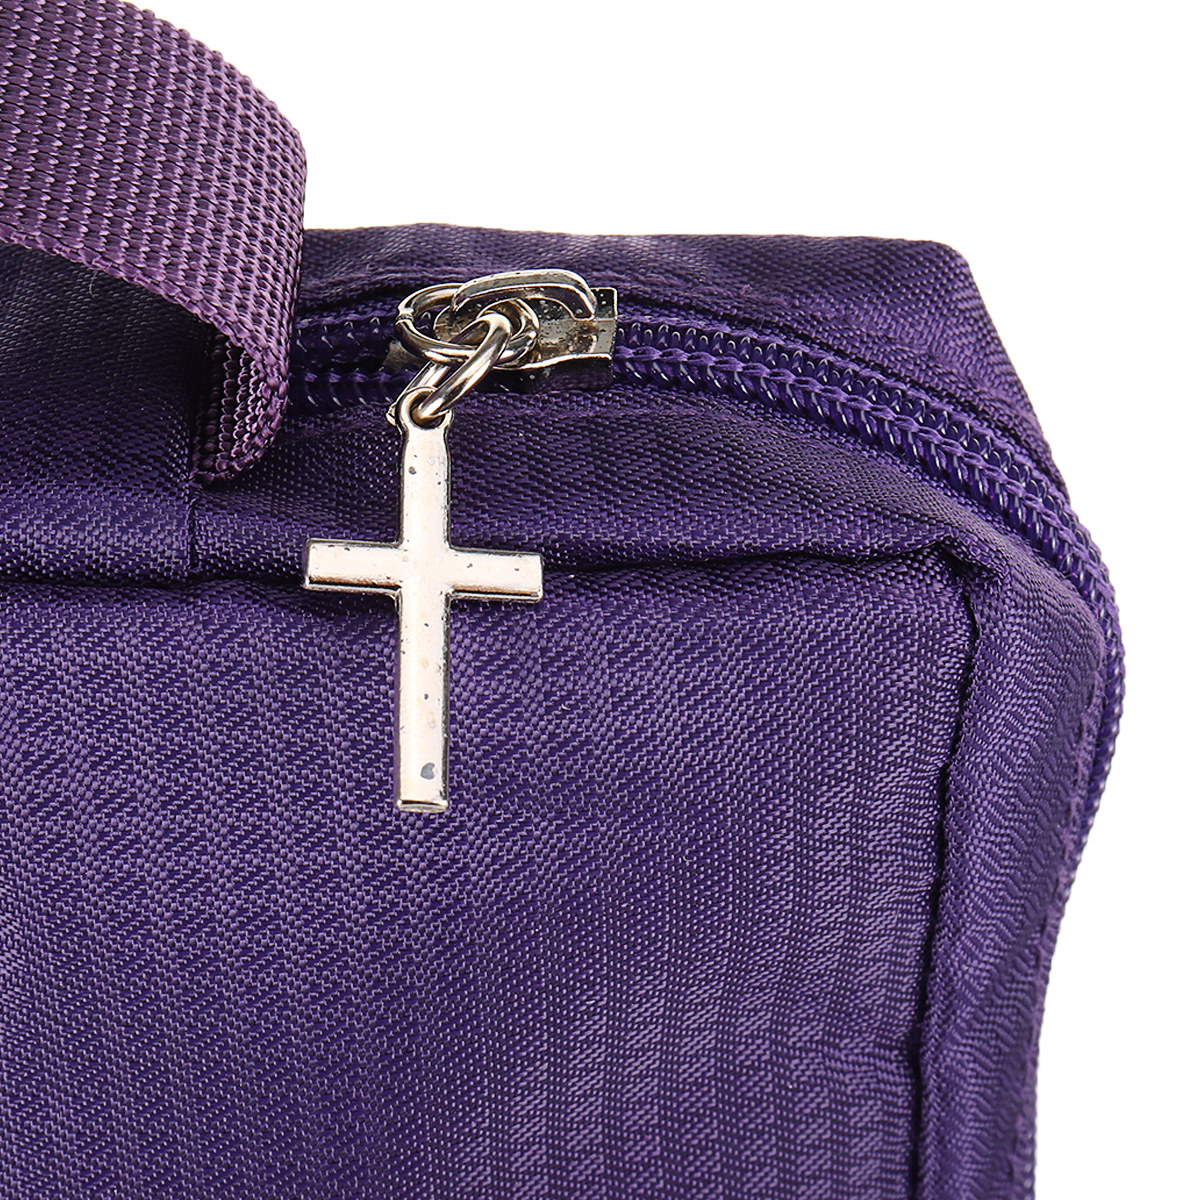 Large-Bible-Study-Book-Holy-Cover-Case-Carry-Bag-Bible-Study-Book-Holy-Cover-Case-Protective-Canvas--1708239-7